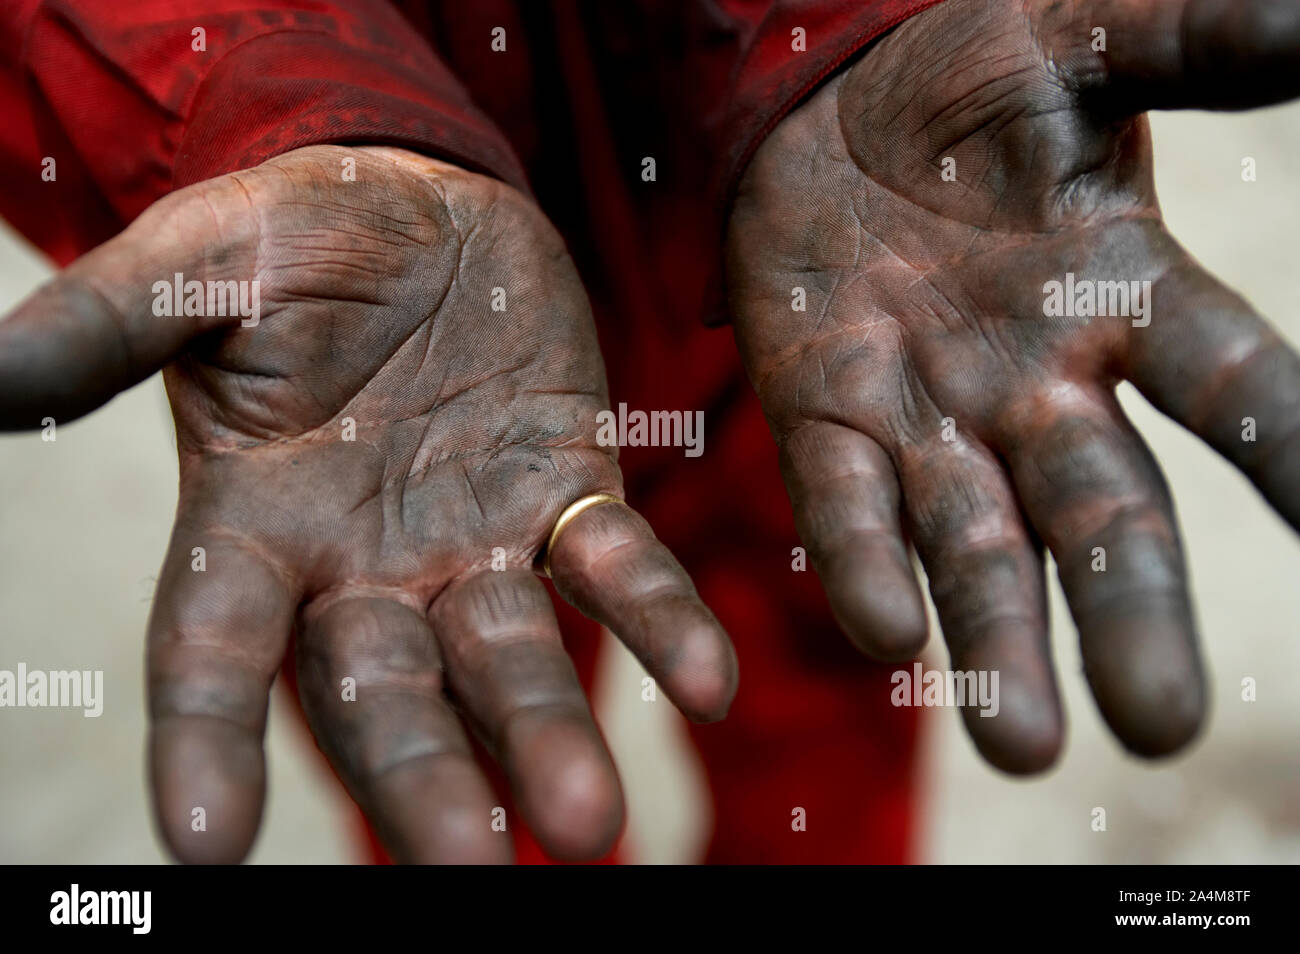 Oil on hands. Dirty work. Stock Photo